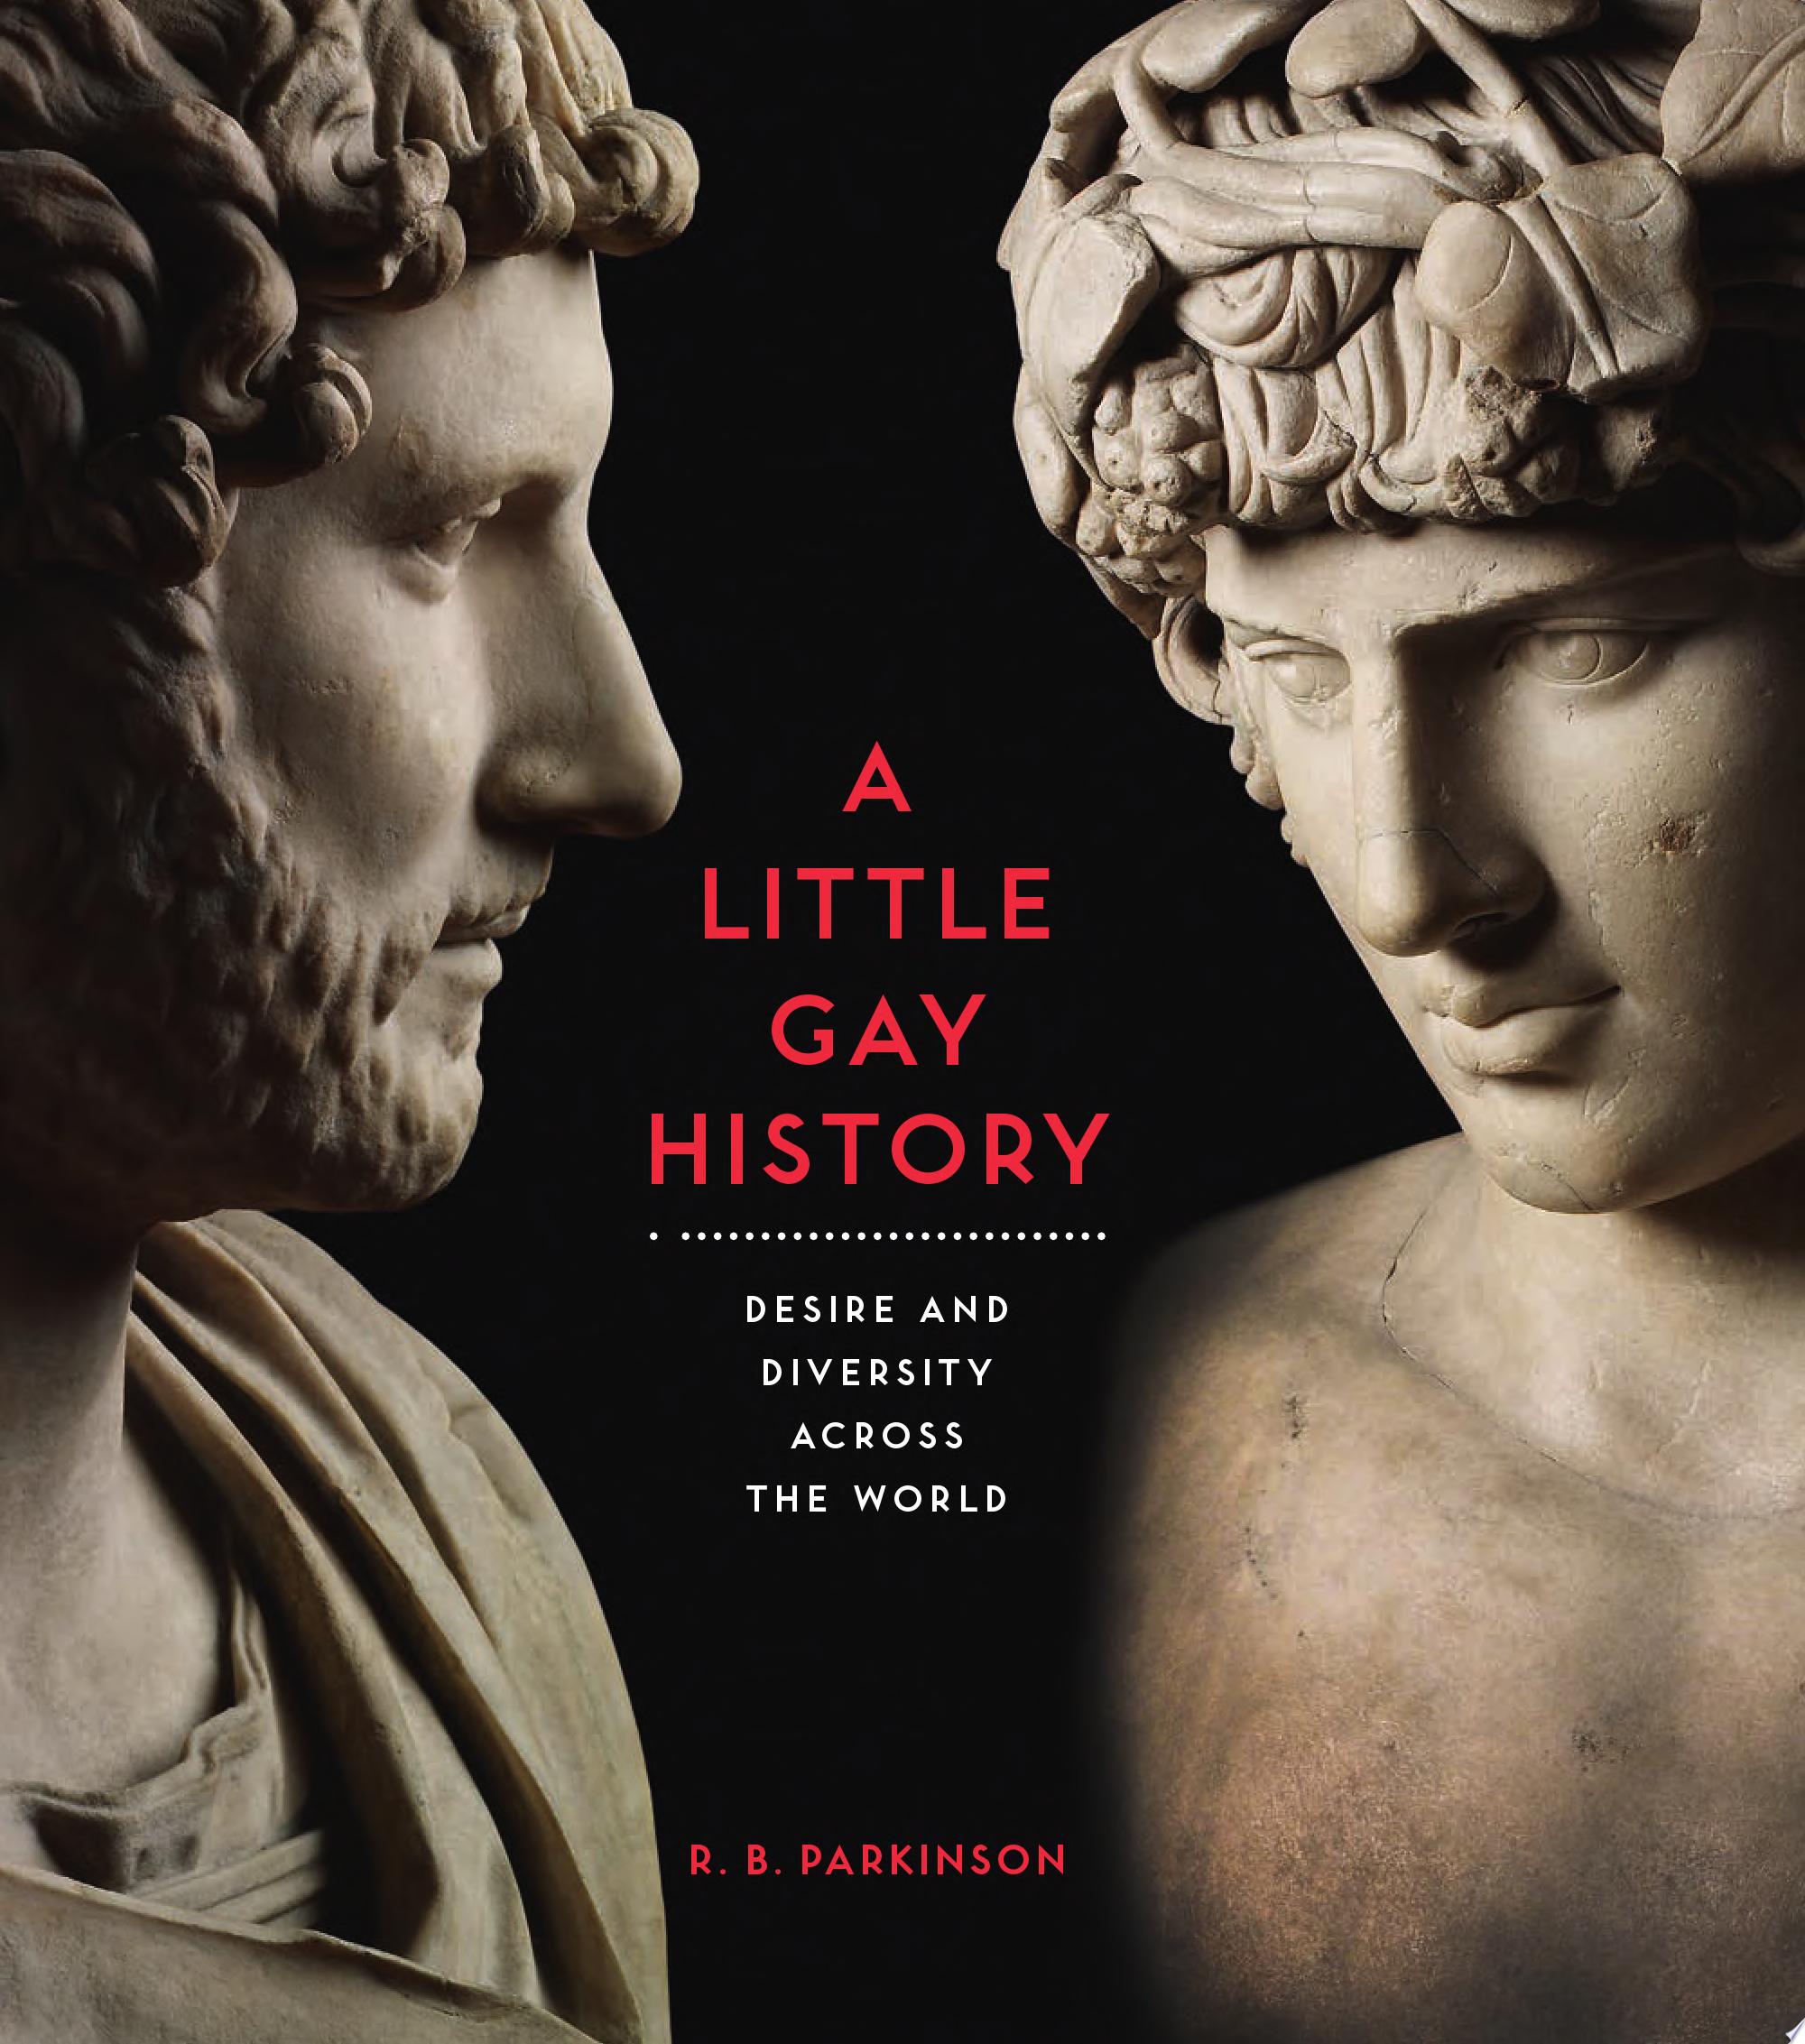 Image for "A Little Gay History"